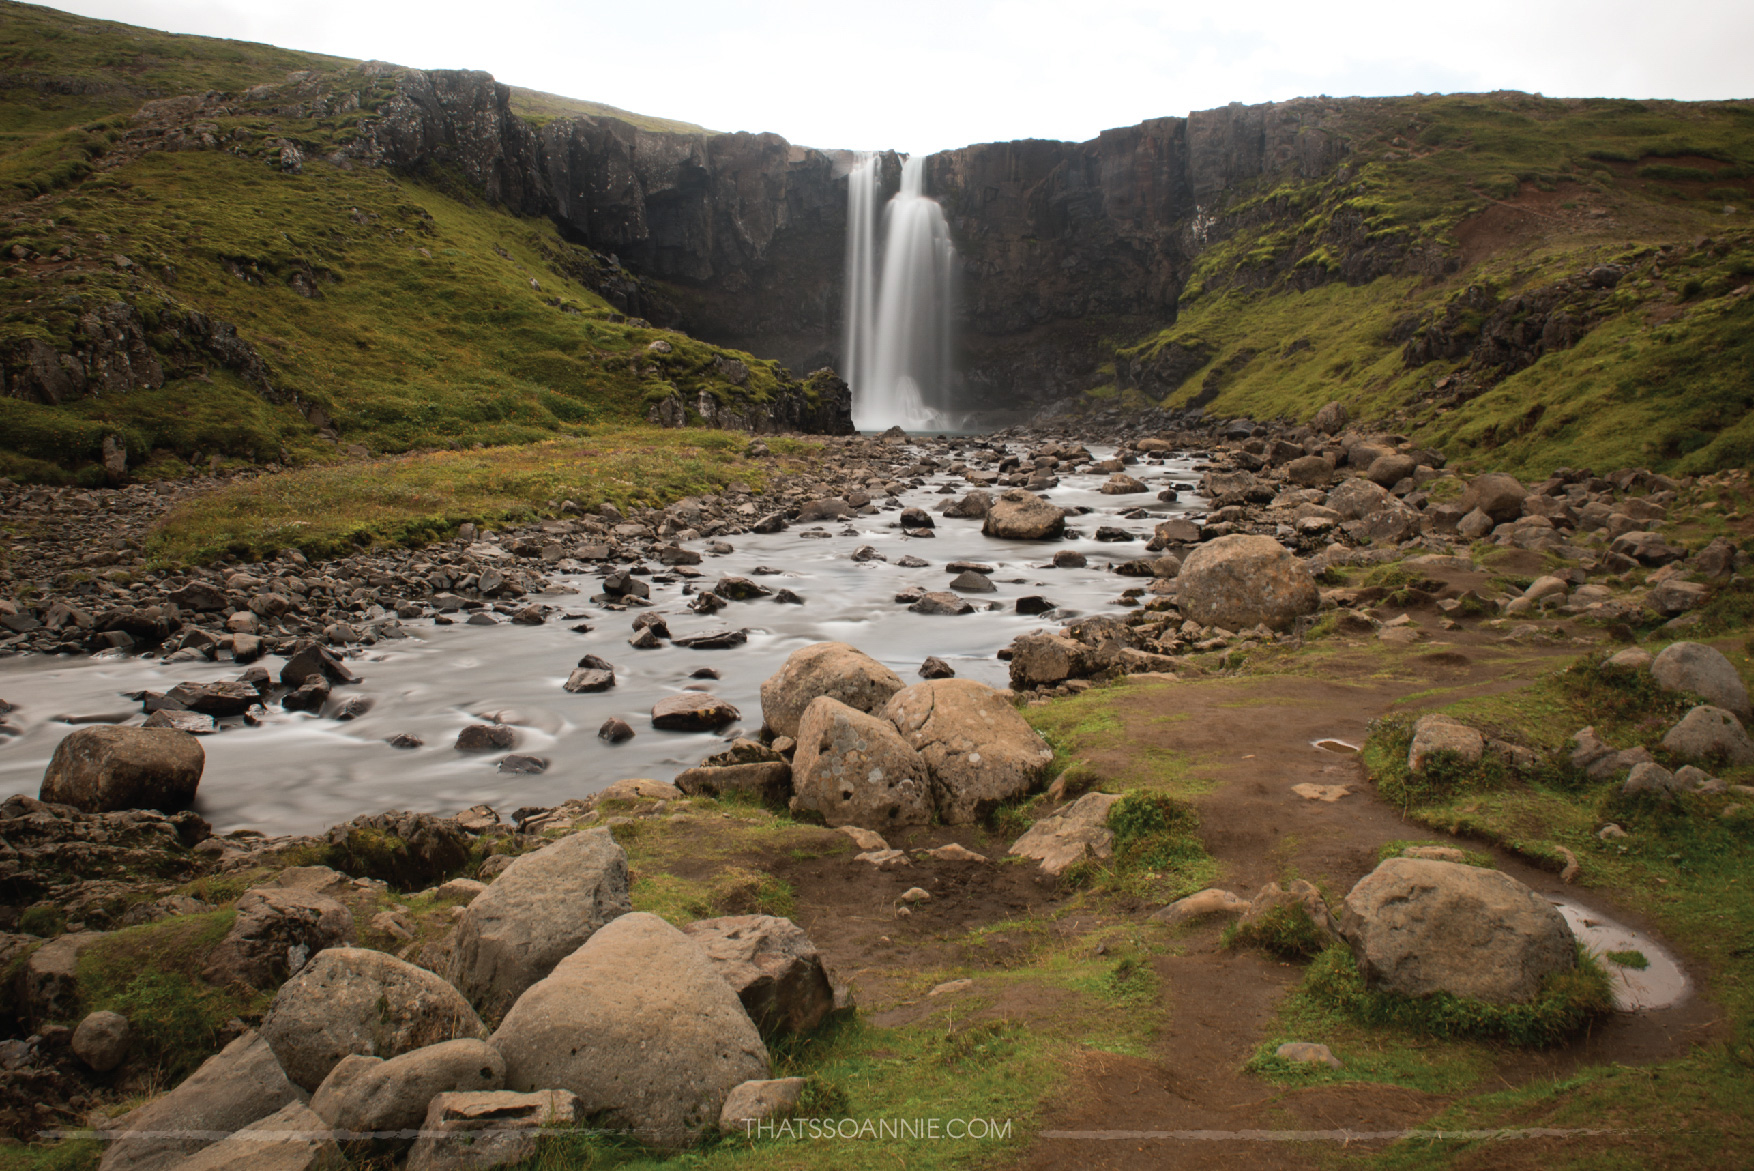 Gufufoss is a gorgeous, secluded and tourist-free hidden gem, just by the side of the road that takes you to Seyðisfjörður, Iceland.